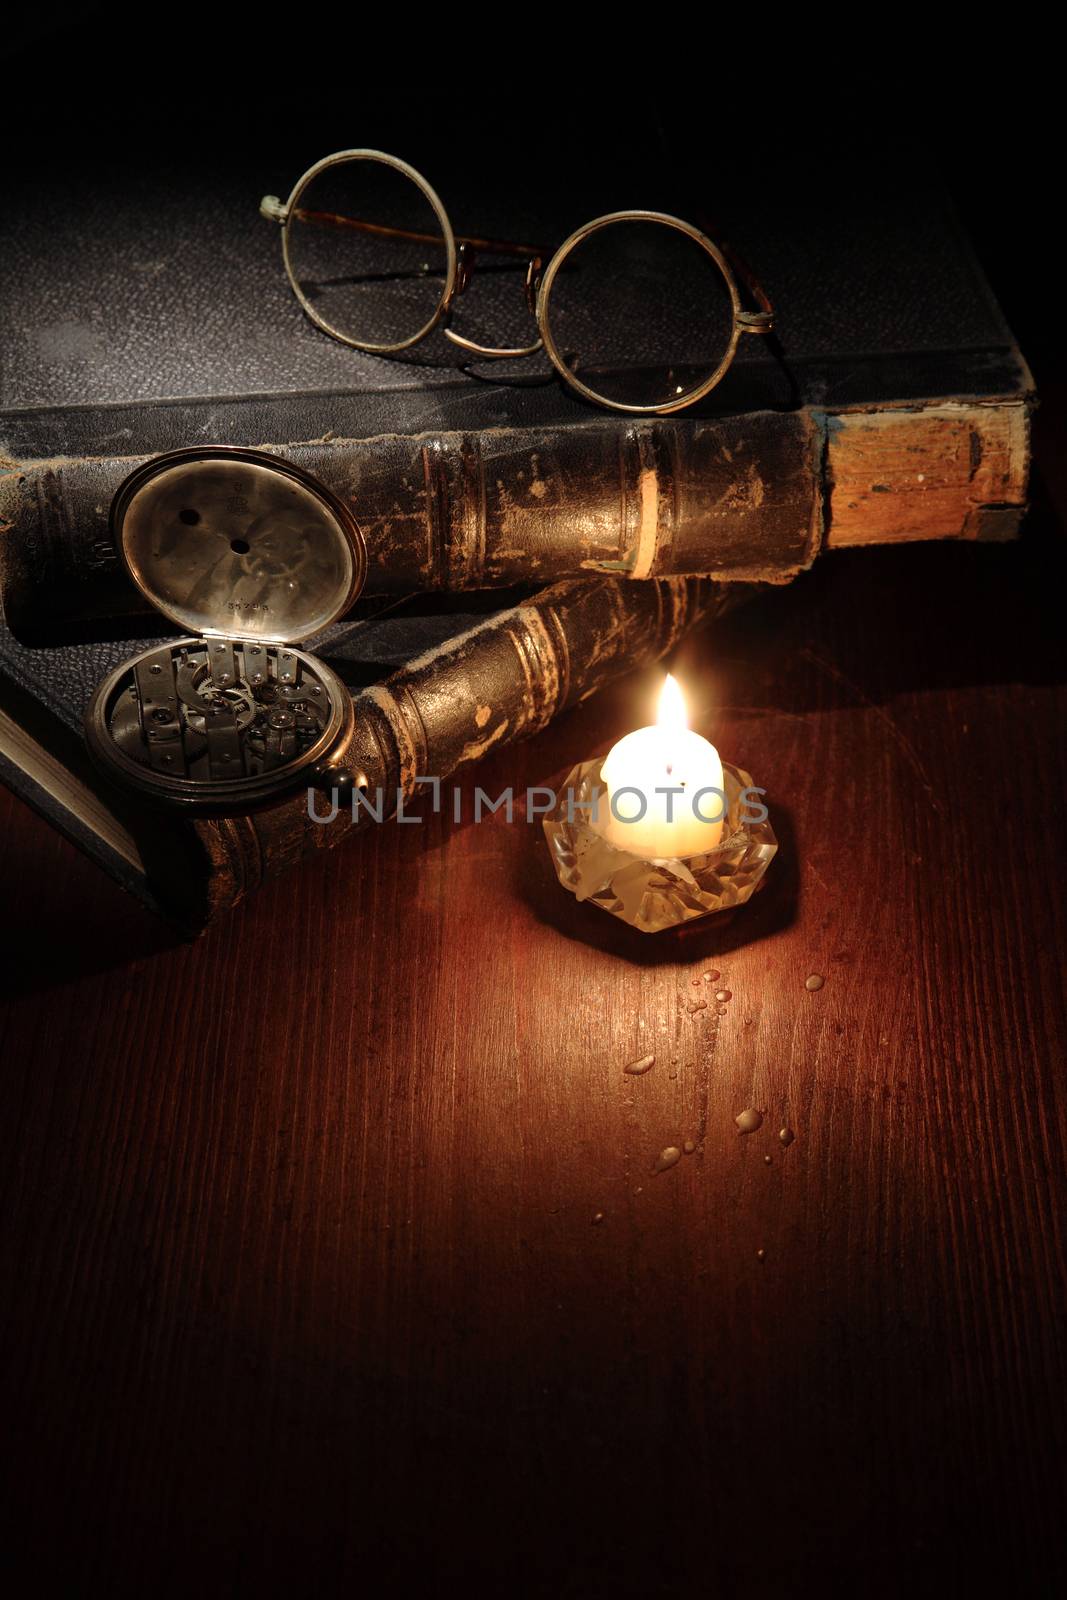 Vintage still life with quill pen and spectacles on old books near lighting candle